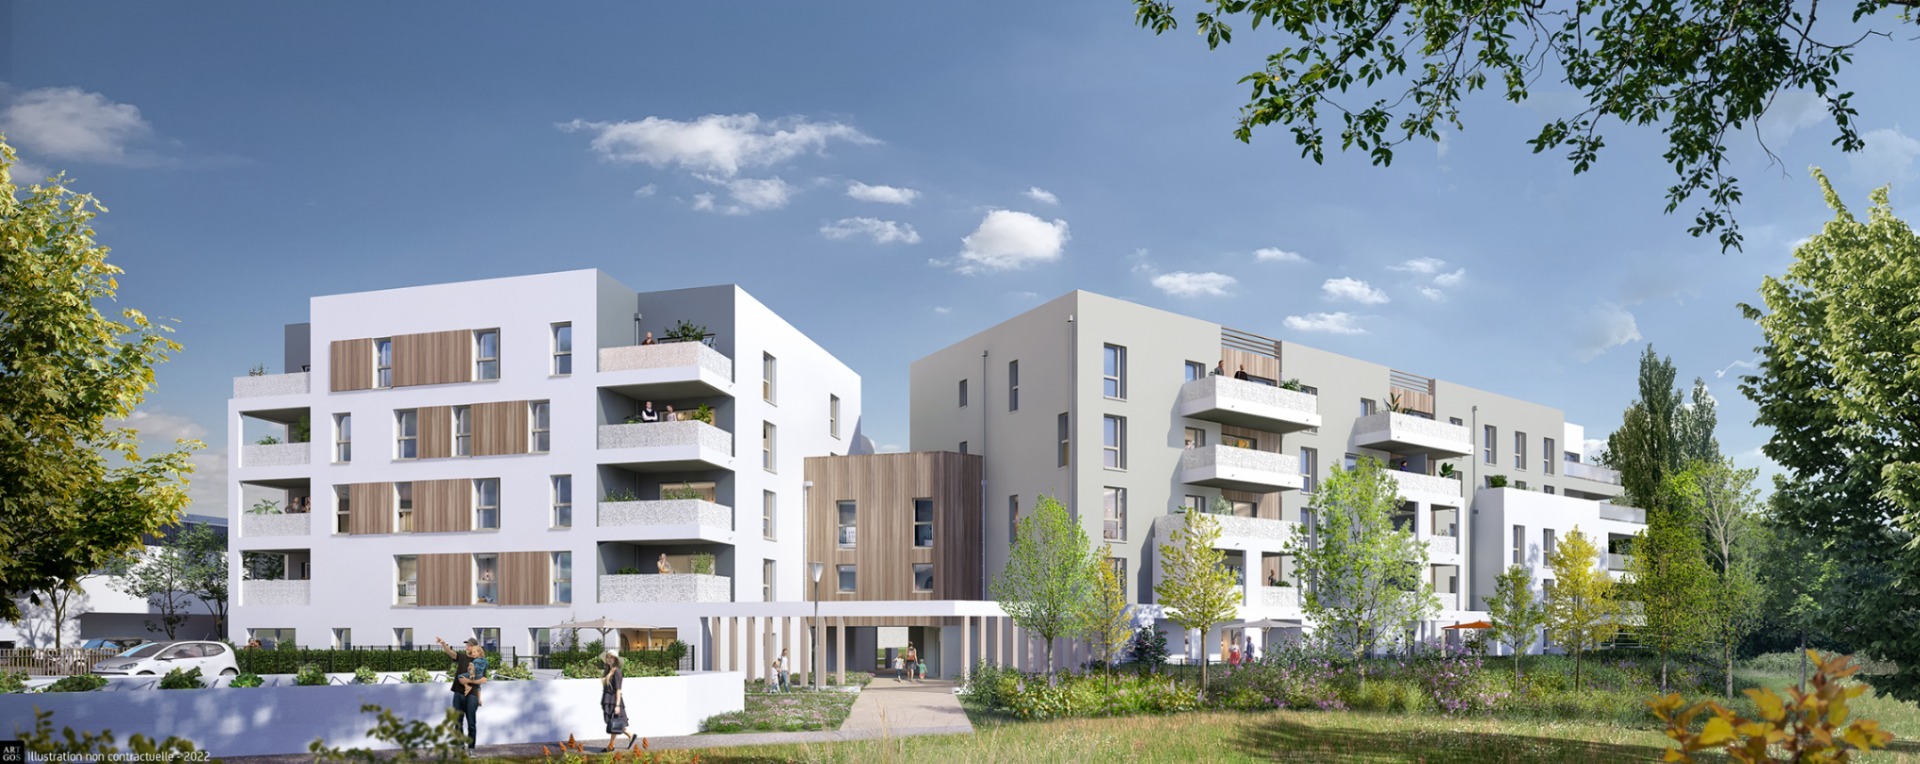 Programme immobilier neuf NATURE PSLA